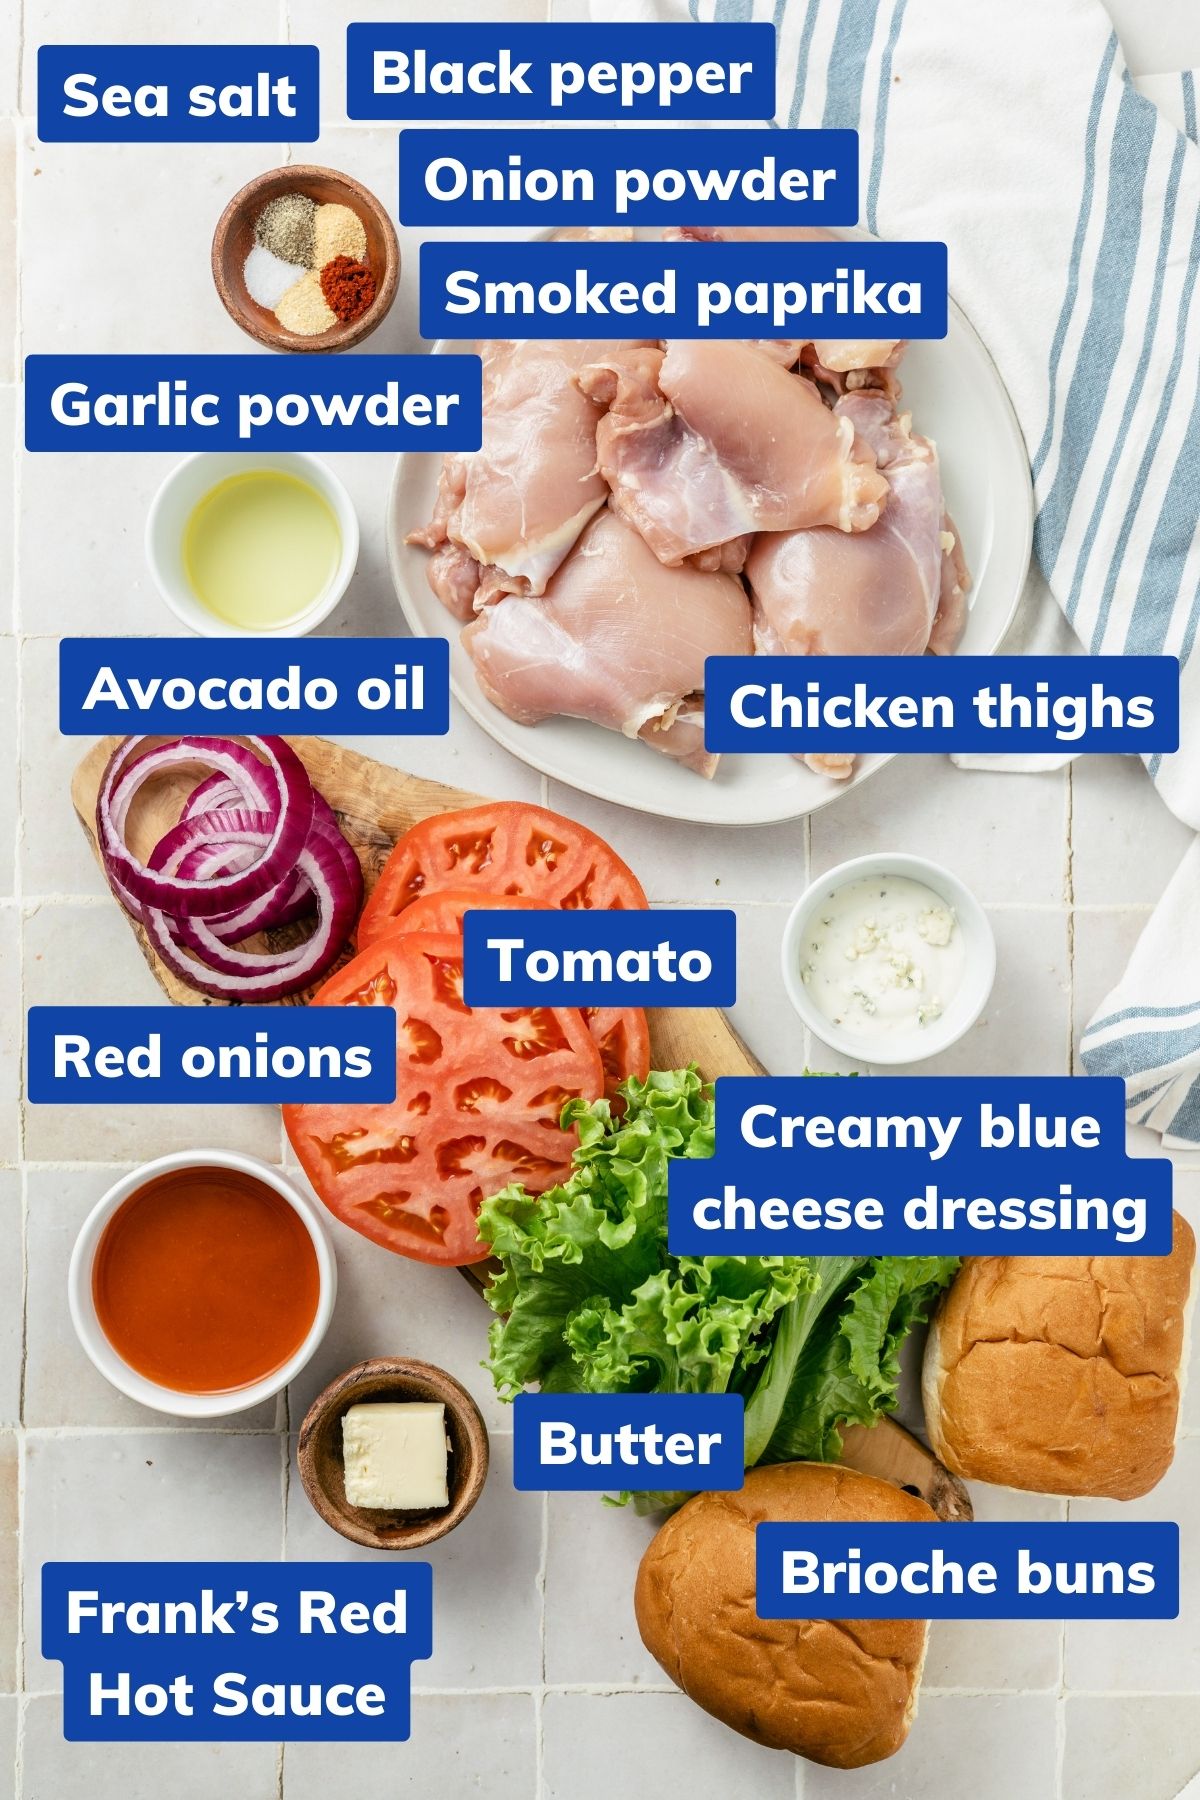 ingredients for buffalo chicken sandwiches are displayed in individual bowls, including boneless skinless chicken thighs, seasonings like sea salt, black pepper, smoked paprika, garlic and onion powder, and avocado oil. Additionally, there's Frank's Red Hot Sauce, melted butter, soft brioche buns, fresh produce like butter lettuce, tomatoes, red onions, and a bowl of creamy blue cheese dressing.